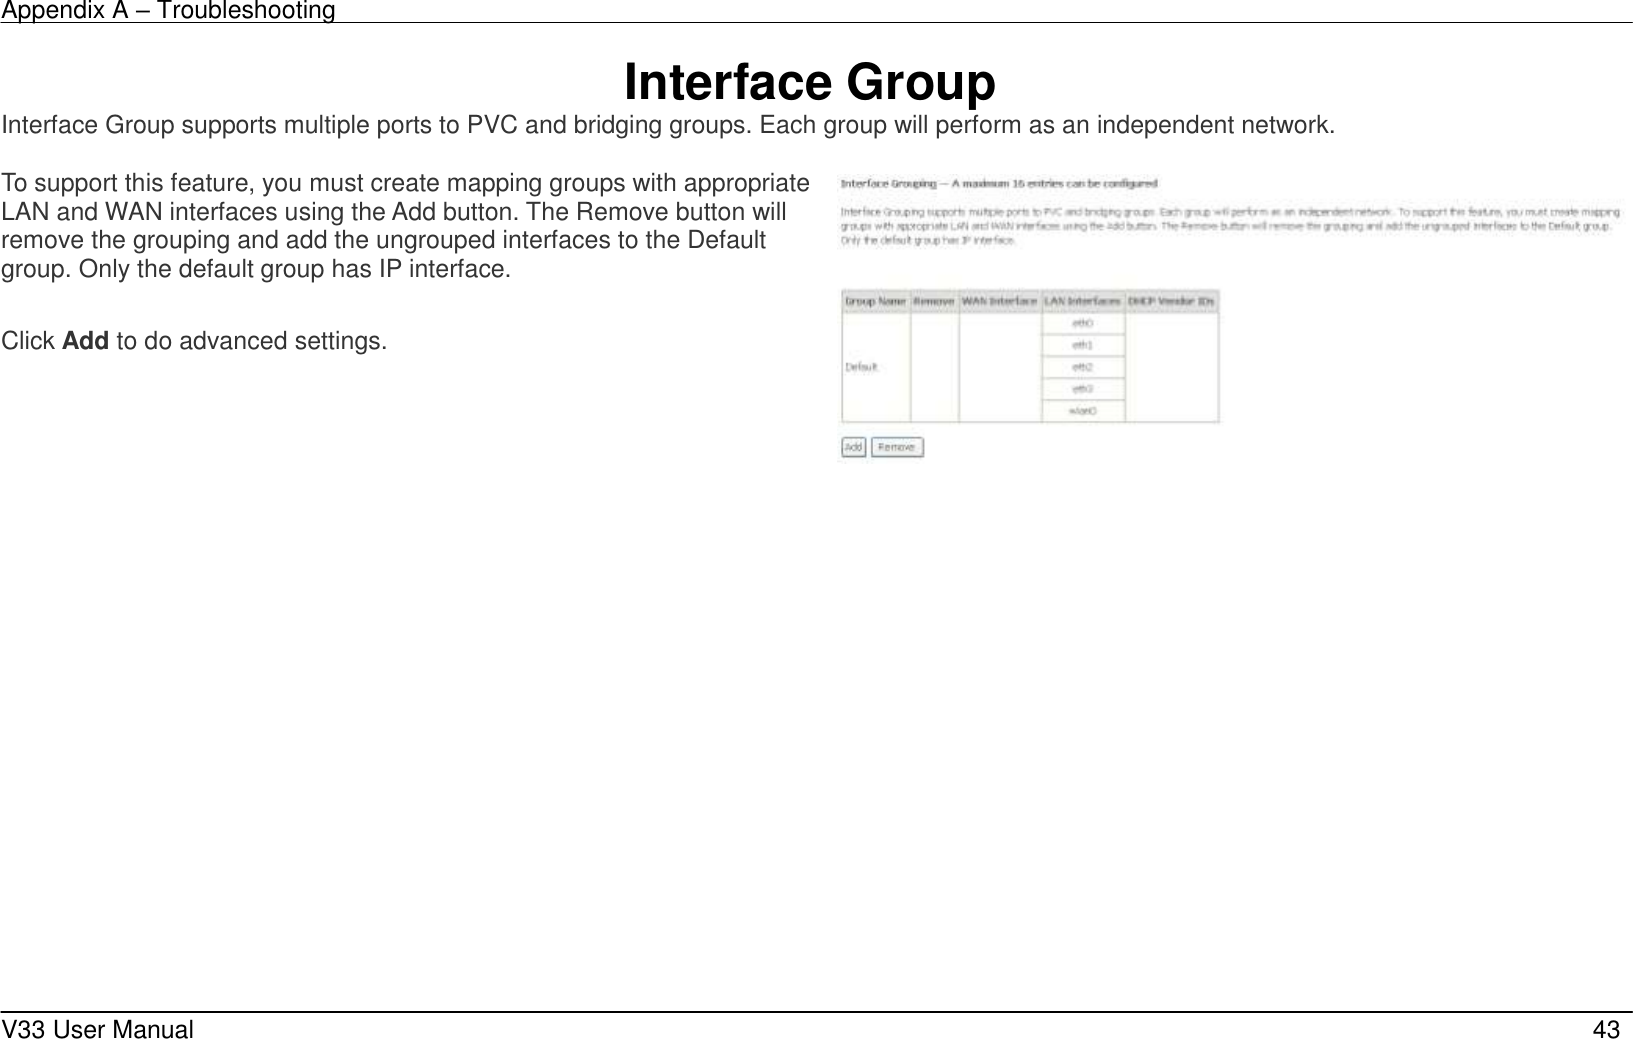 Appendix A – Troubleshooting    V33 User Manual   43 Interface Group Interface Group supports multiple ports to PVC and bridging groups. Each group will perform as an independent network.  To support this feature, you must create mapping groups with appropriate LAN and WAN interfaces using the Add button. The Remove button will remove the grouping and add the ungrouped interfaces to the Default group. Only the default group has IP interface.  Click Add to do advanced settings.         